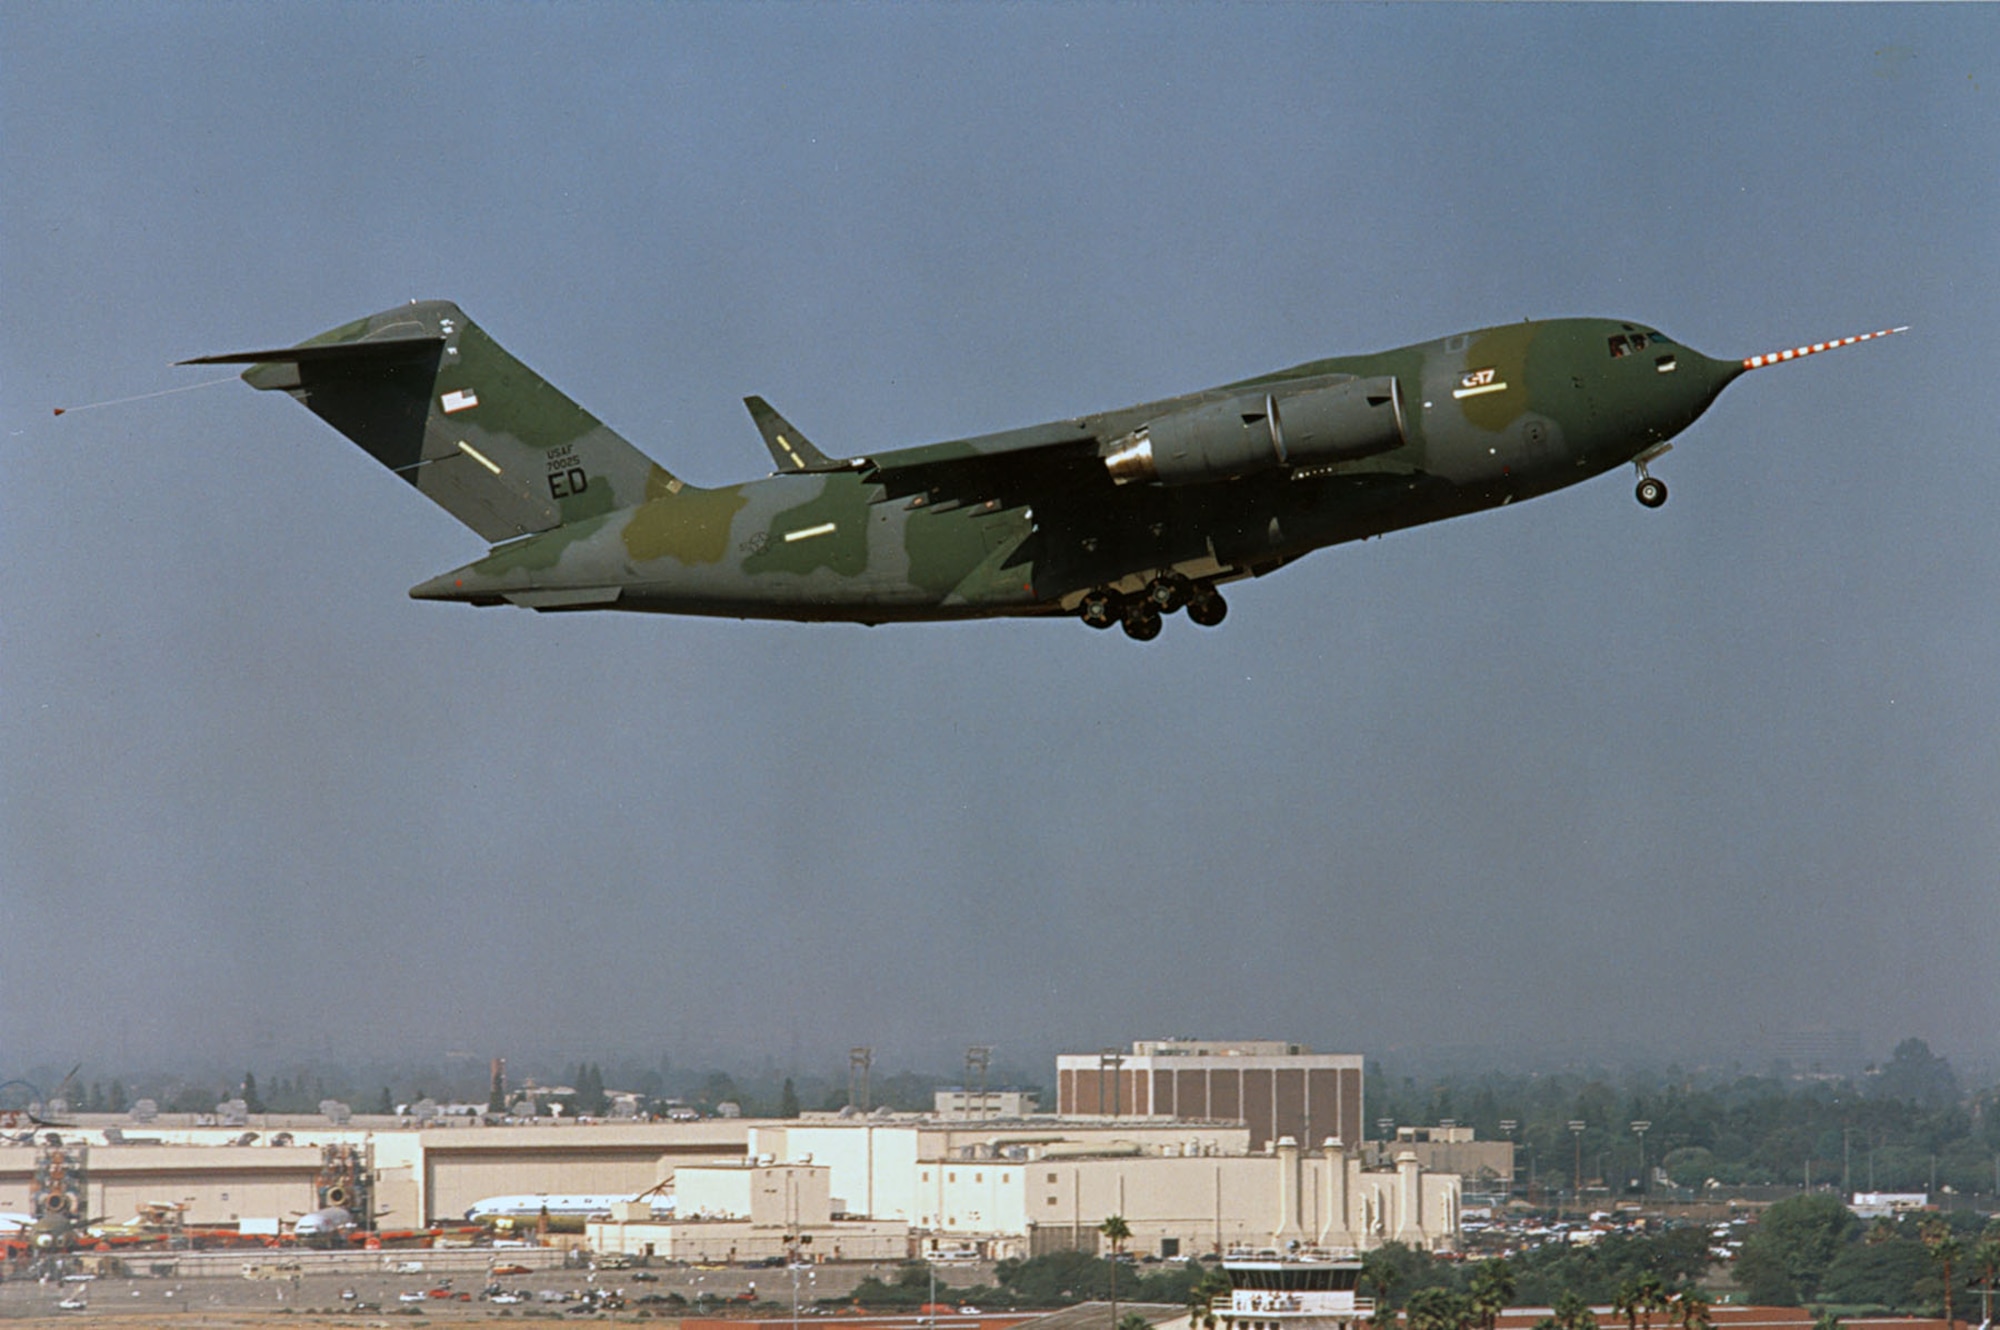 The C-17 Globemaster III T-1 takes off from Long Beach, Calif., on Sept. 15, 1991. (Photo courtesy of Boeing)